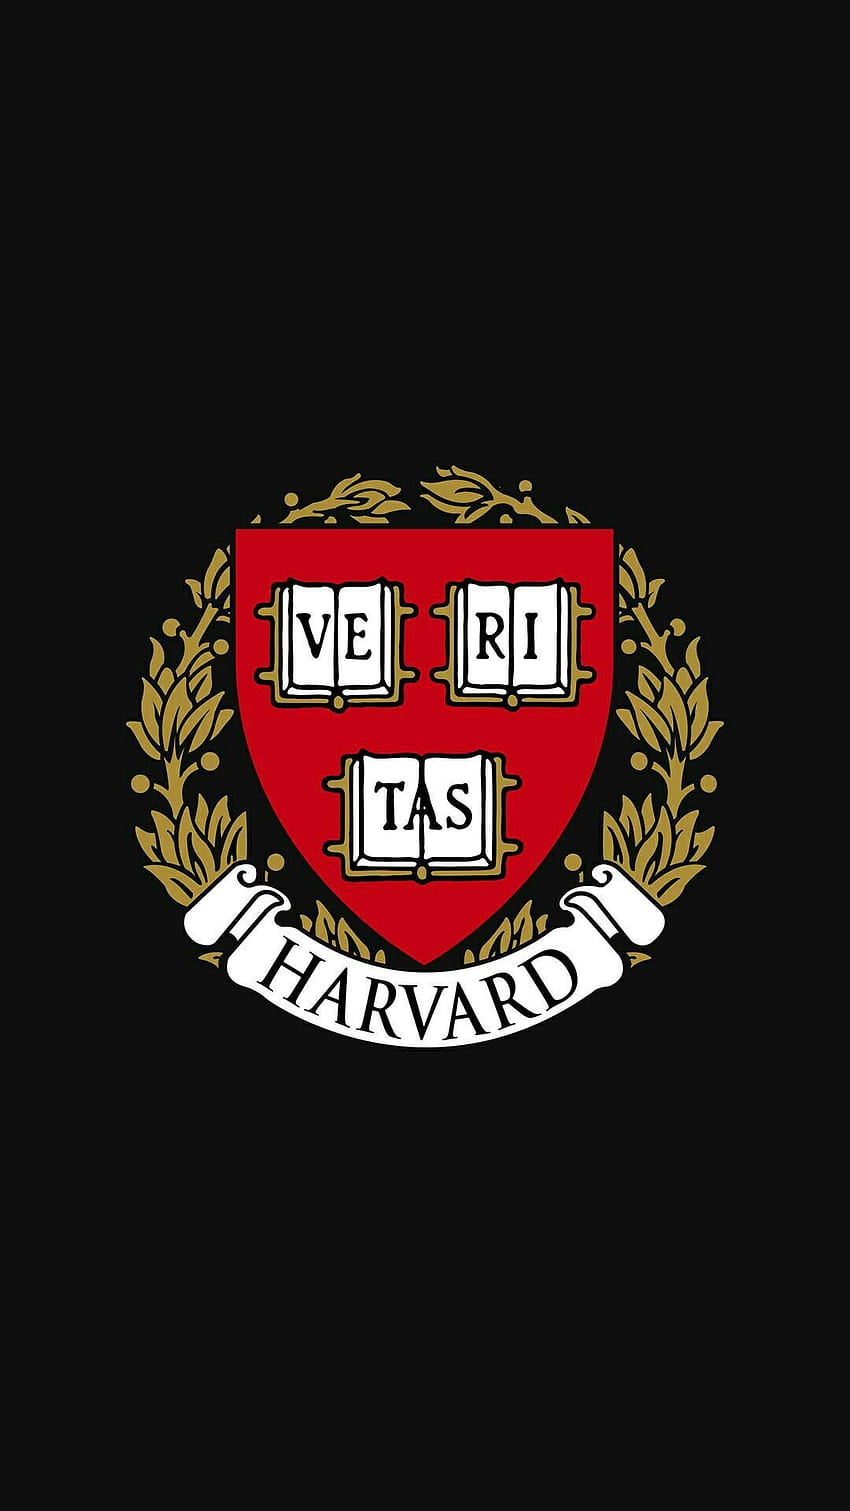 DaveB isn't connected with Harvard Red Conservative Reps, Harvard University HD phone wallpaper